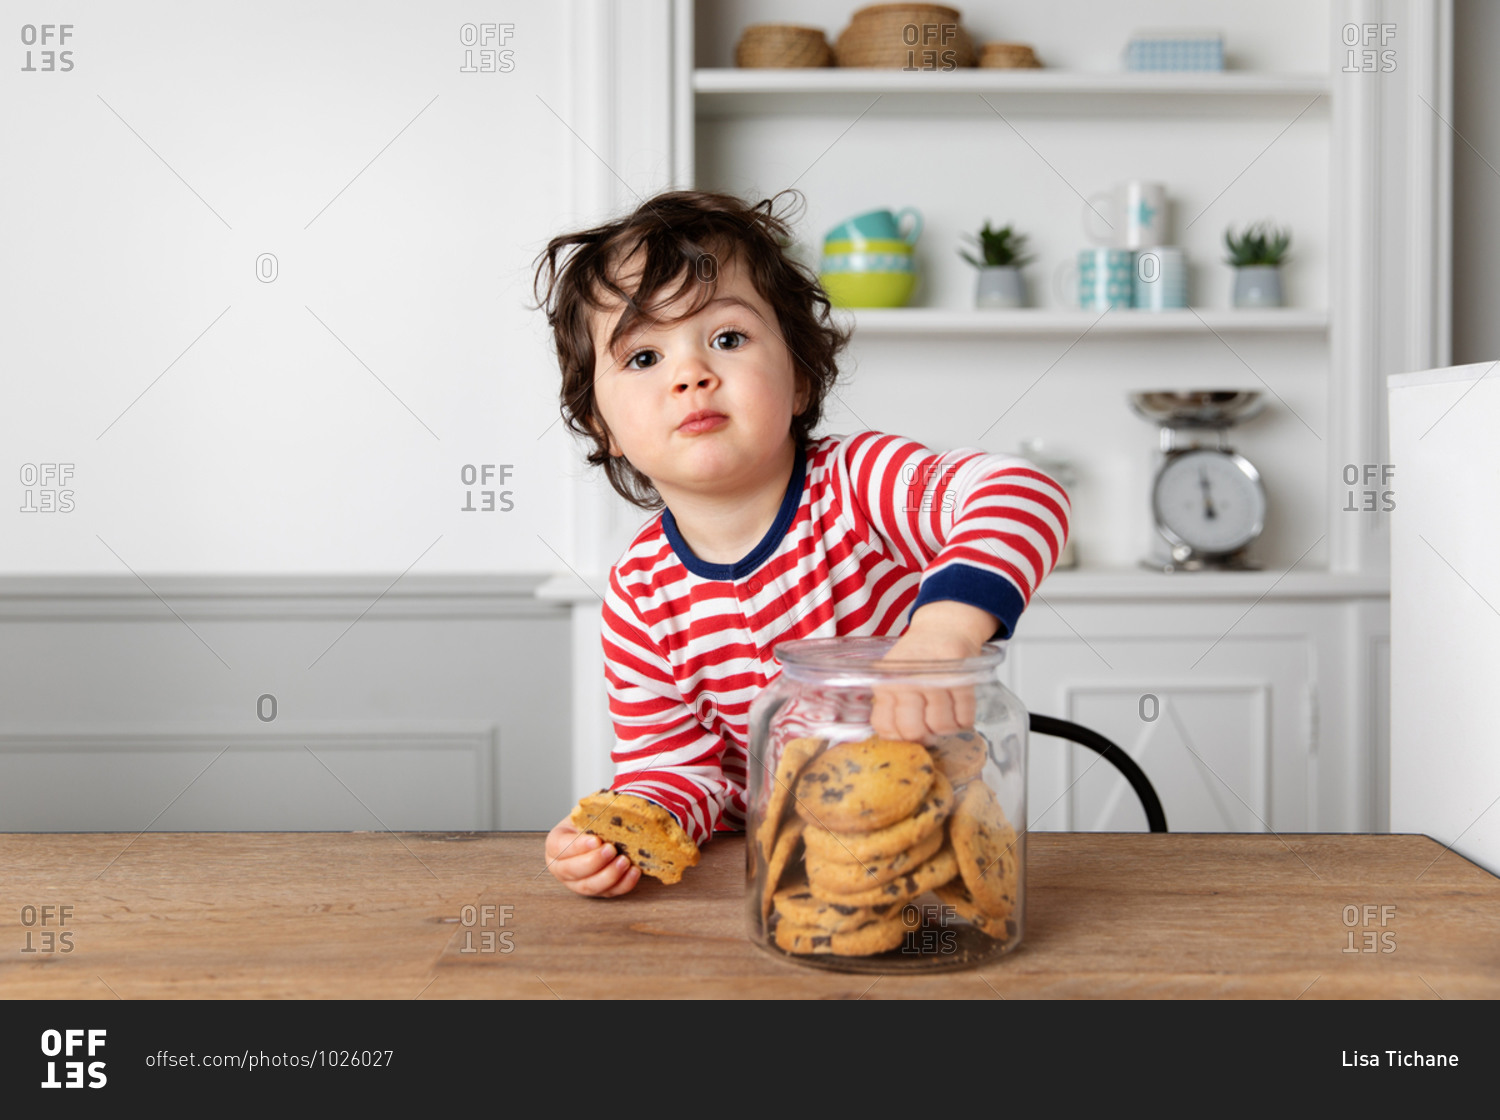 Cute toddler reaching into a cookie jar